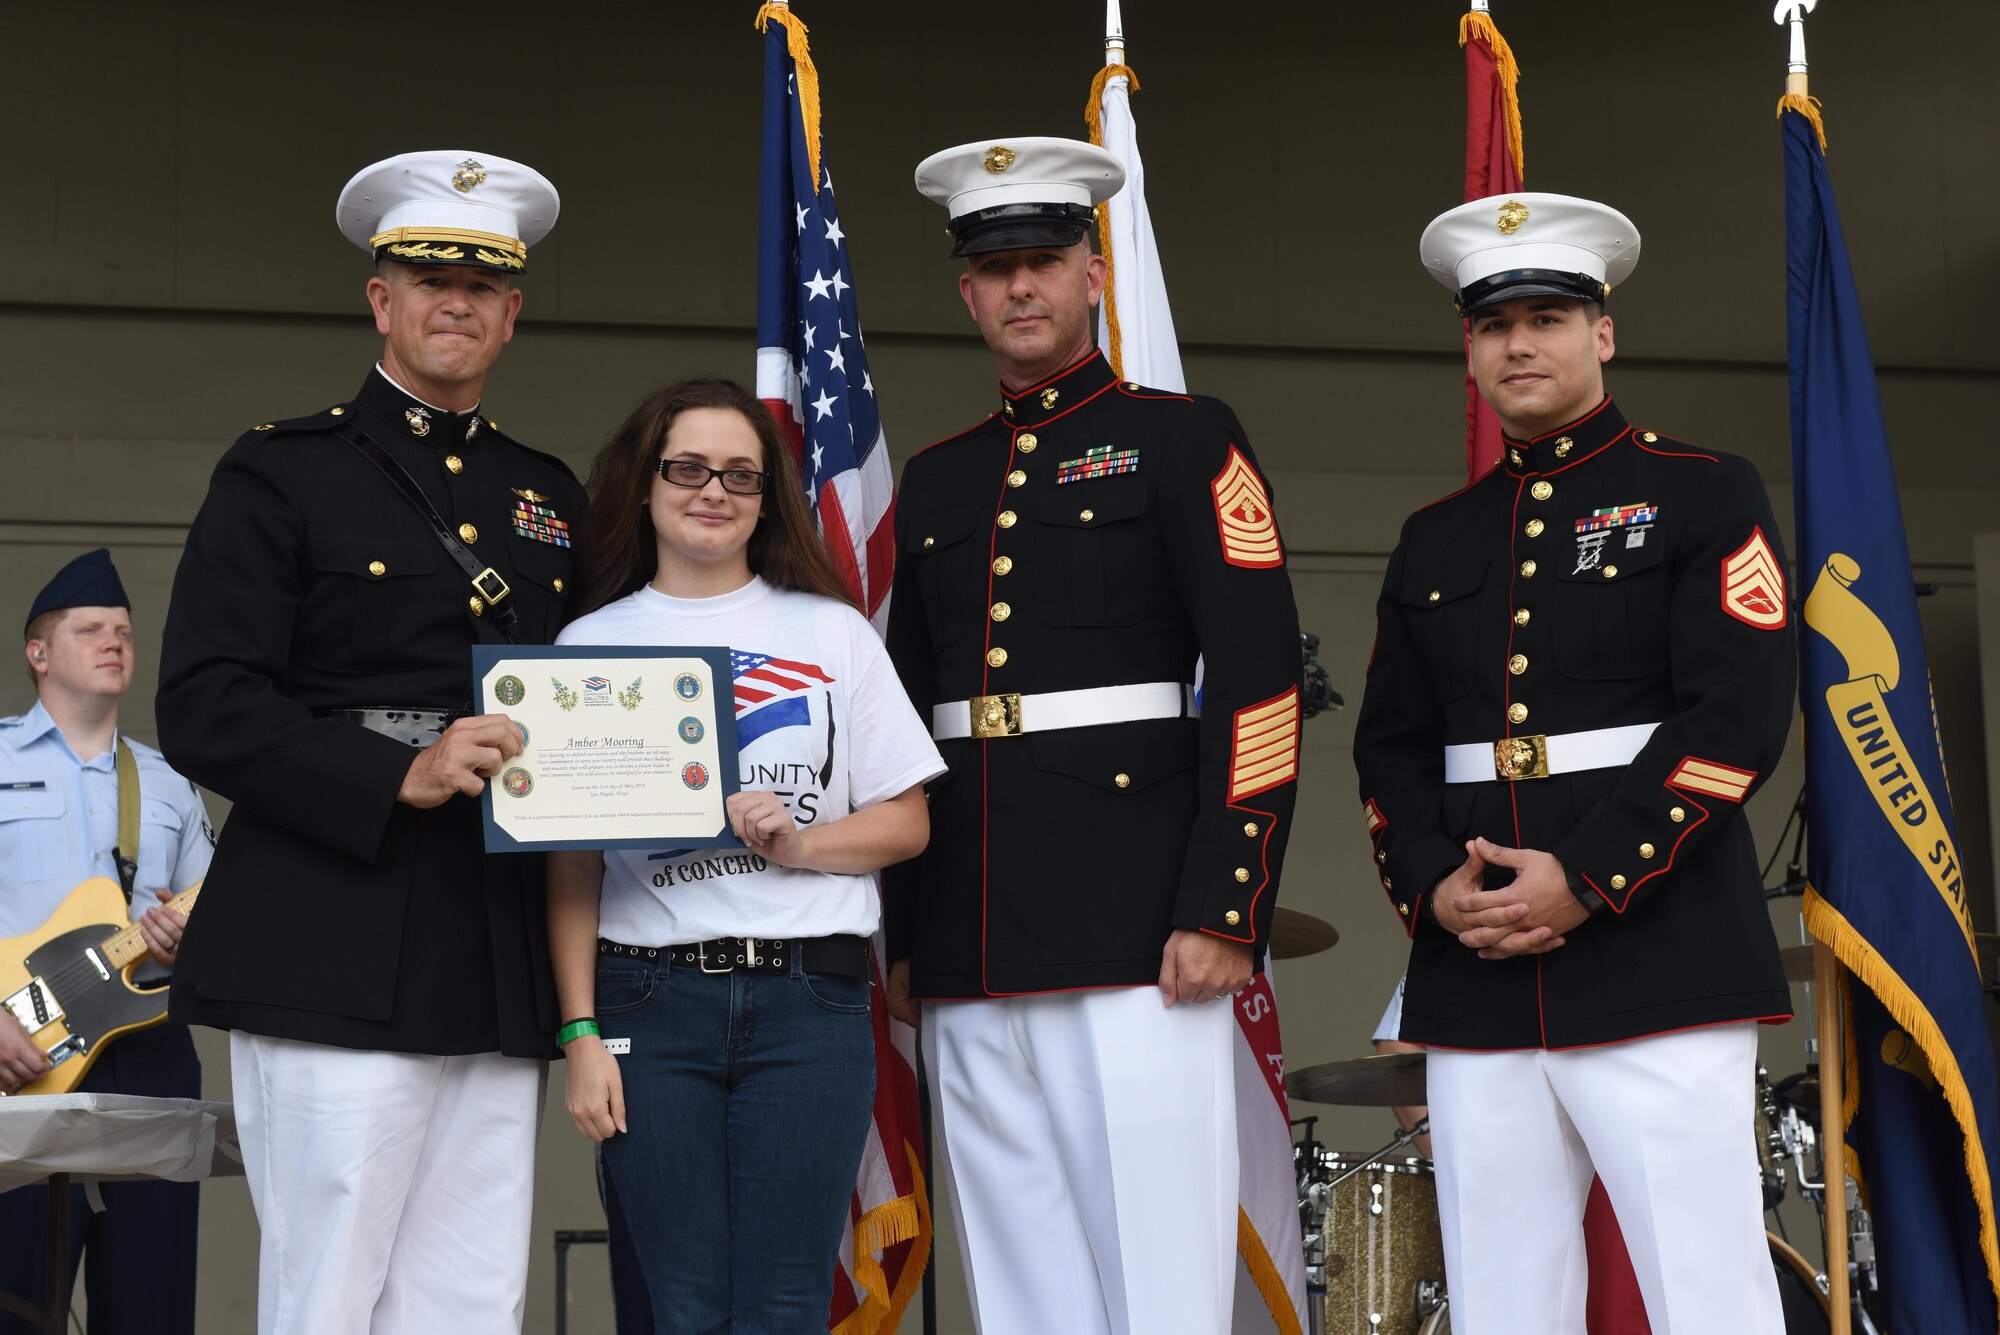 U.S. Marine Corps Maj. Andrew Armstrong, Marine Corps Detachment Commanding Officer, presents a certificate to Amber Mooring, high school student, for choosing to enlist in the Marine Corps, at the RiverStage in San Angelo, Texas, May 21, 2016. (U.S. Air Force photo by Airman 1st Class Chase Sousa/Released)